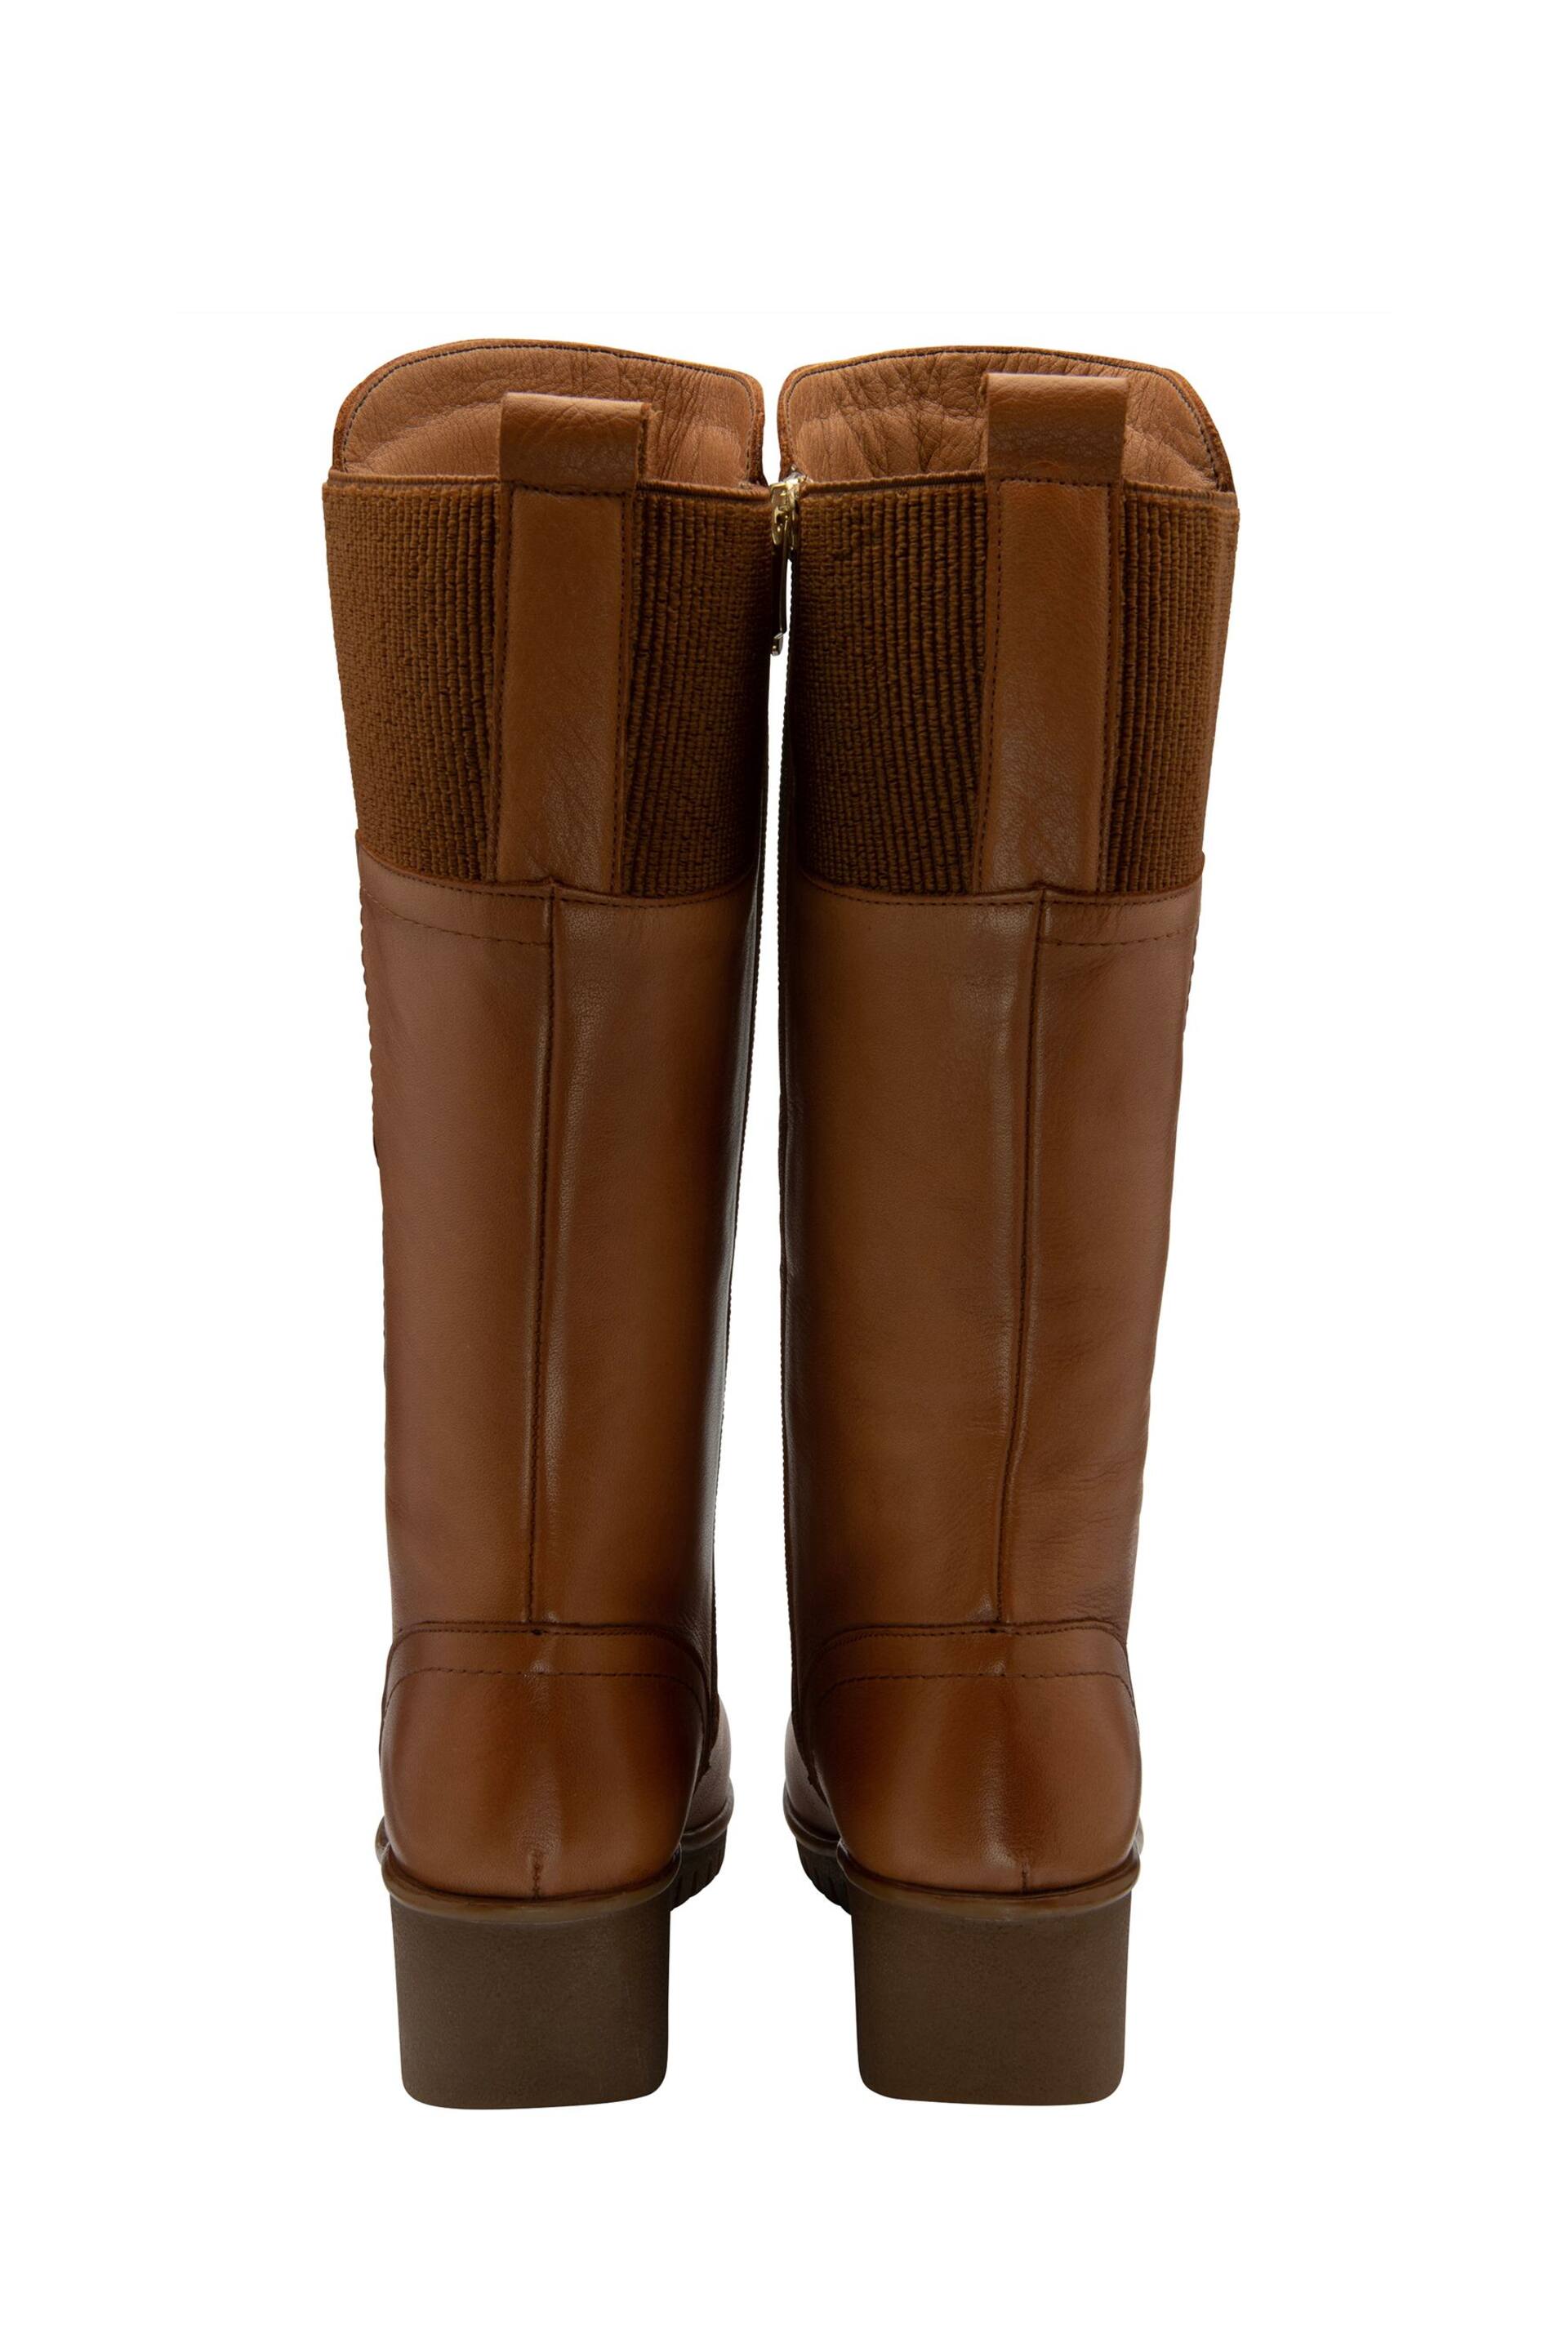 Lotus Brown Leather Wedge Knee-High Boots - Image 3 of 4